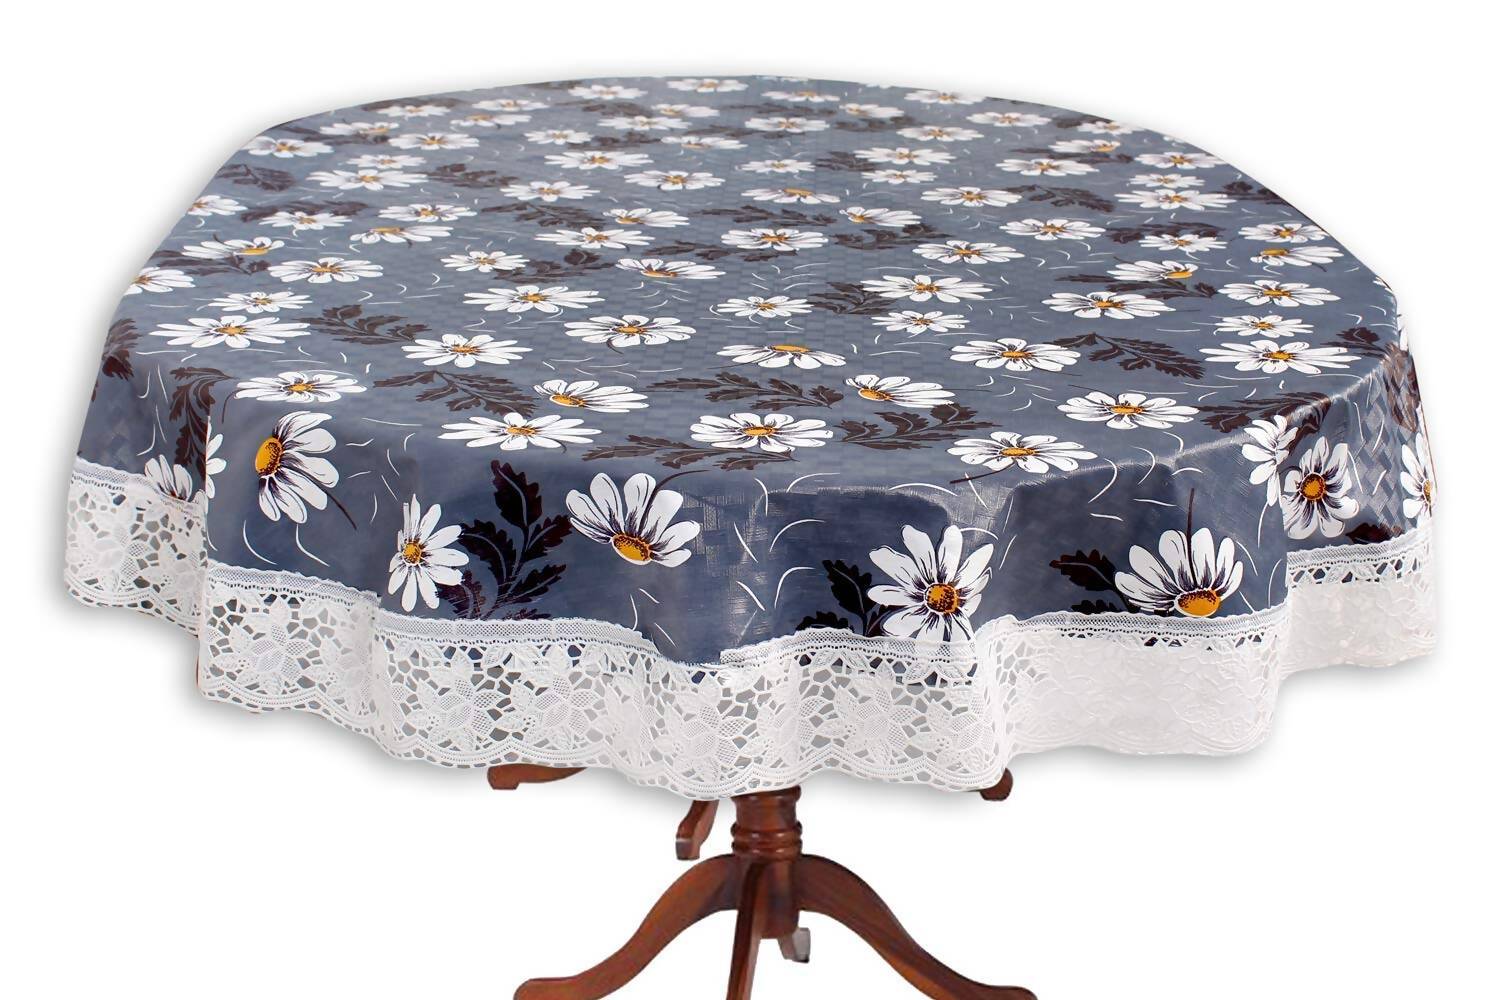 Buy Casa-Nest Printed Pvc Plastic Flowered 4 Seater Round Shape Table Cover  - Multicolour Online at Best Price